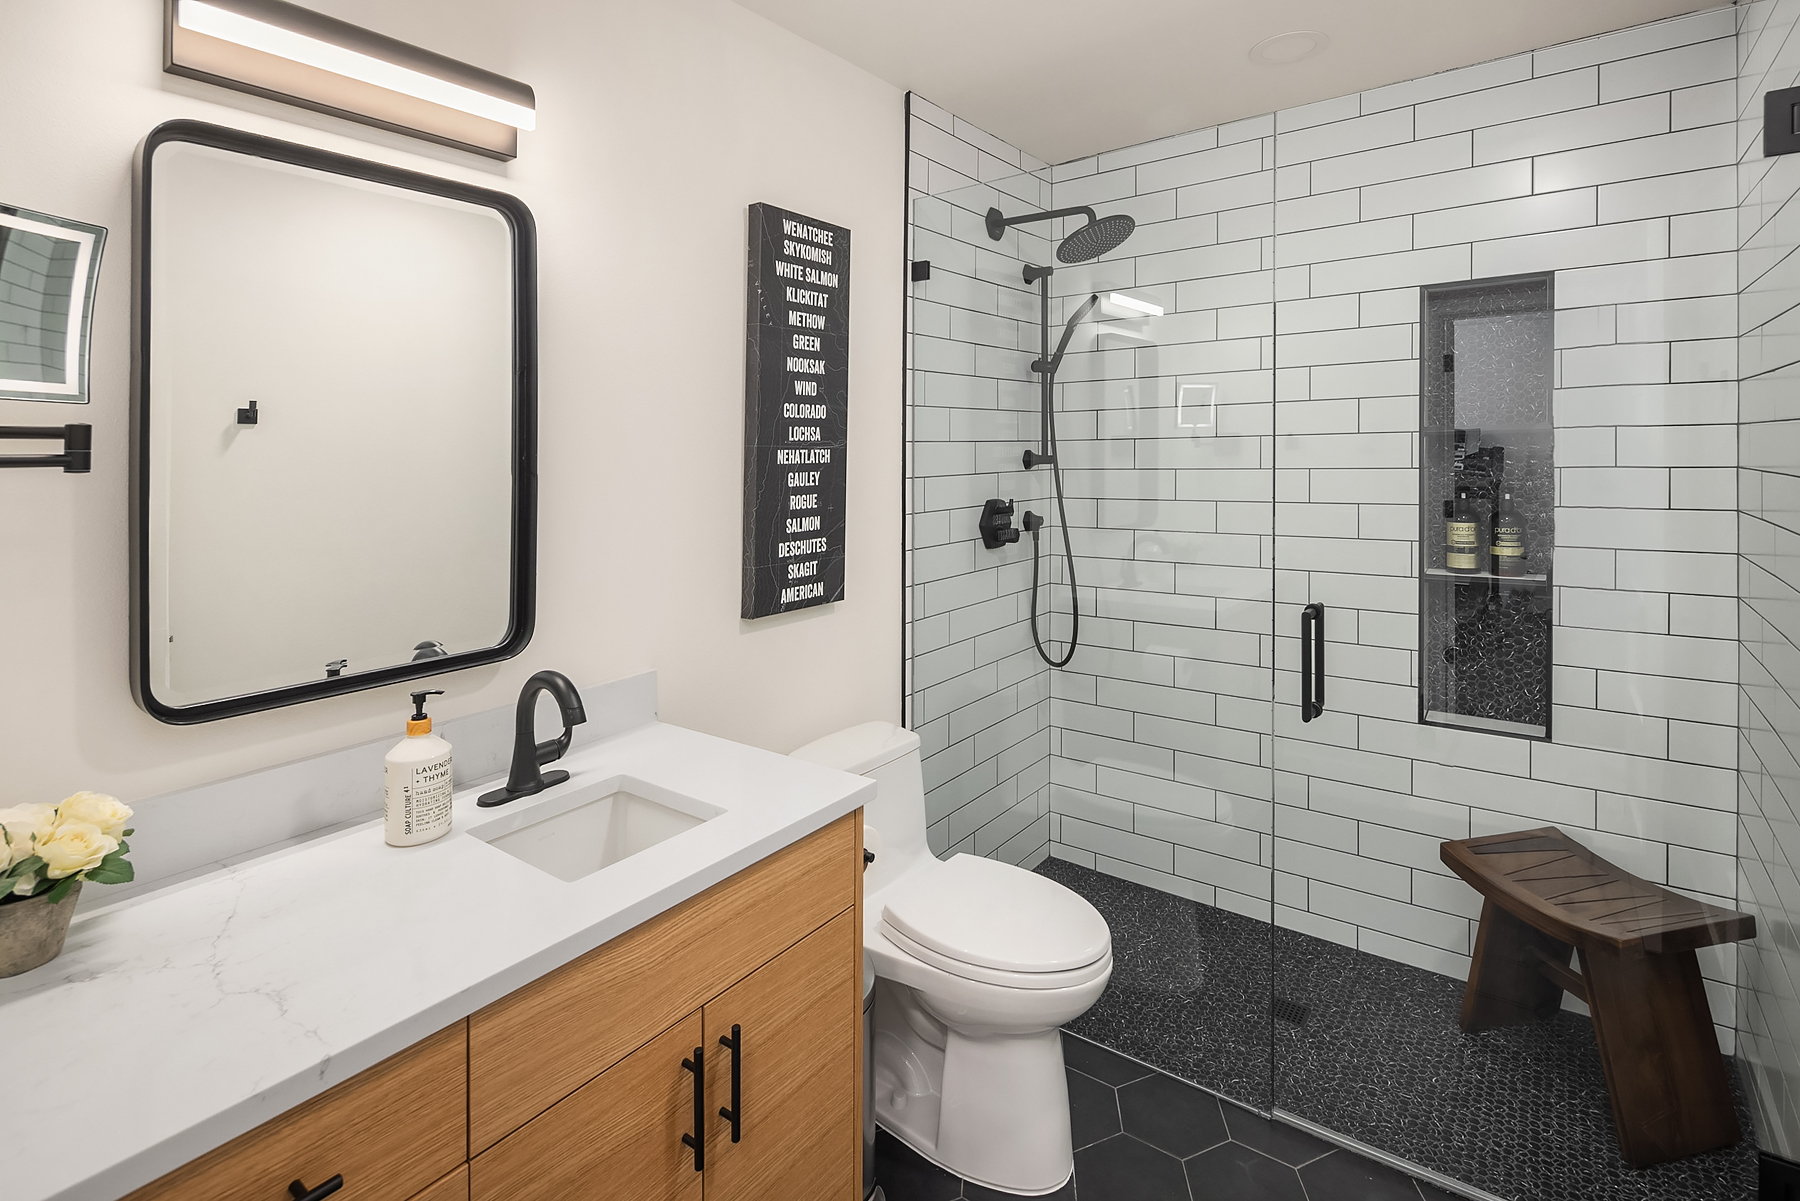 Slosson Project – Issaquah Bathroom Remodel 2